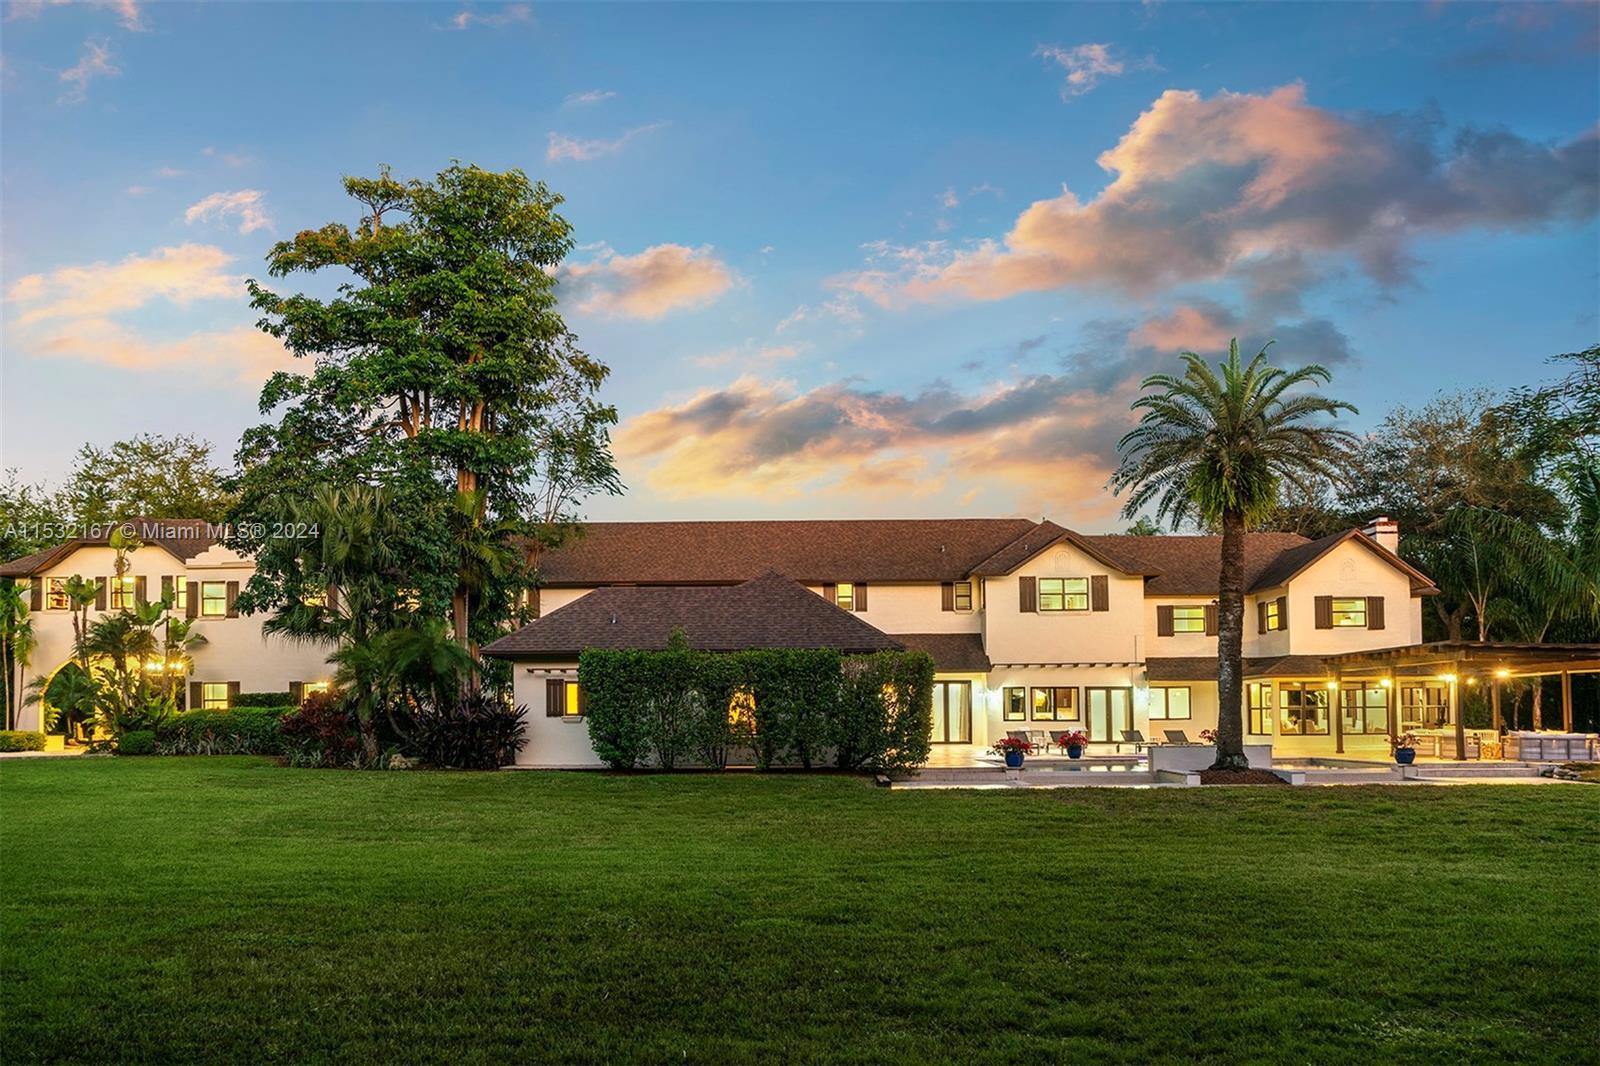 Nestled in Pinecrest, this traditional charm w modern updates estate graces a stunning 1.5-acre gate